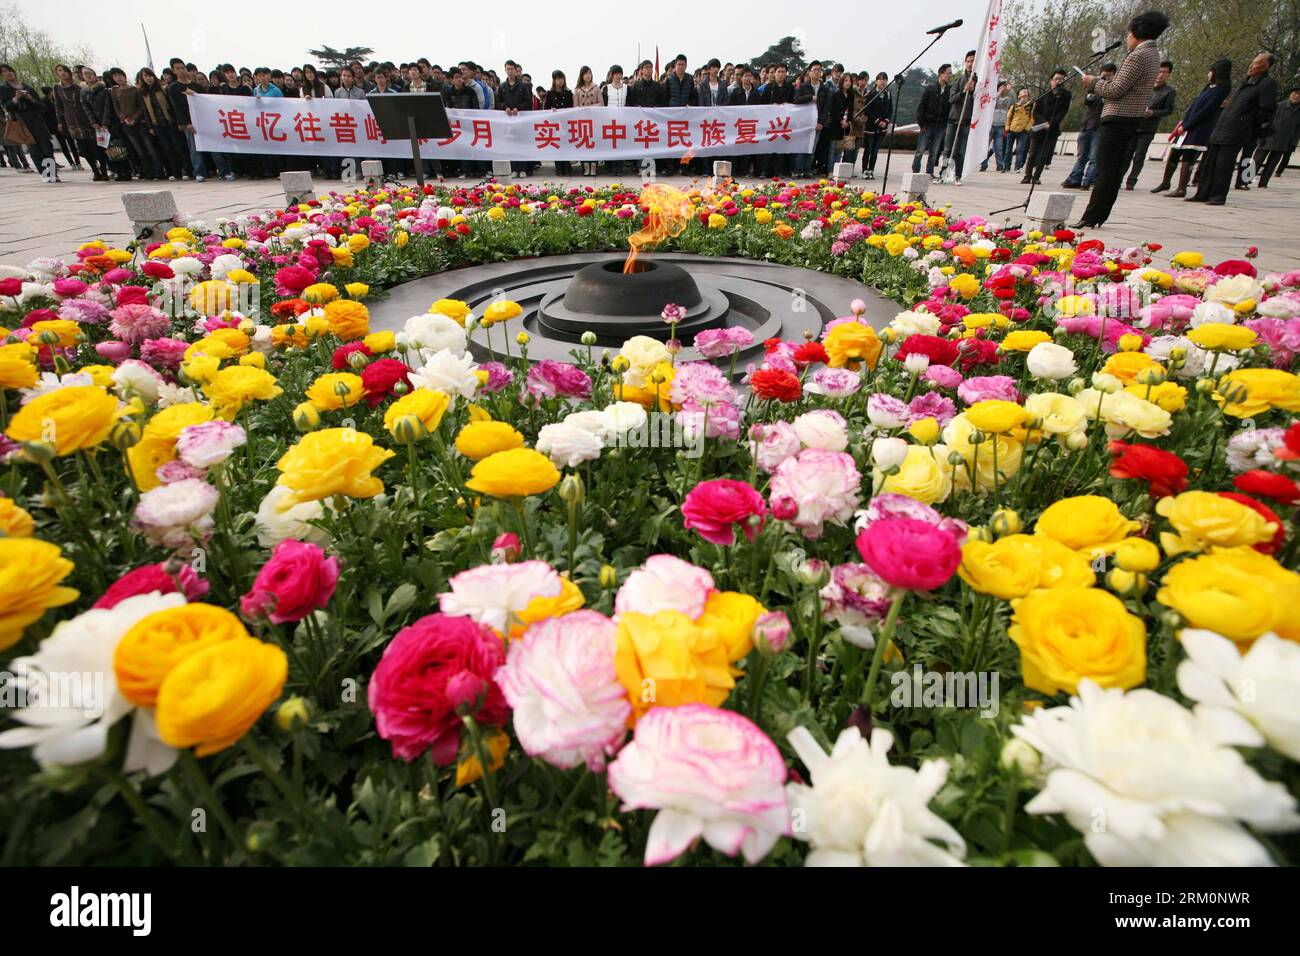 Bildnummer: 59460480  Datum: 30.03.2013  Copyright: imago/Xinhua Students attend a memorial ceremony held at Yuhuatai Martyr Cemetery in Nanjing, capital of east China s Jiangsu Province, March 30, 2013. Various memorial ceremonies were held across the country to pay respect to martyrs ahead of the Qingming Festival, or Tomb Sweeping Day, which falls on April 4 this year. (Xinhua) (ry) CHINA-QINGMING FESTIVAL-MEMORIAL CEREMONIES (CN) PUBLICATIONxNOTxINxCHN Gesellschaft xas x2x 2013 quer o0 Friedhof Trauer Gedenken  Totenfest Totengedenken Blumen     59460480 Date 30 03 2013 Copyright Imago XIN Stock Photo